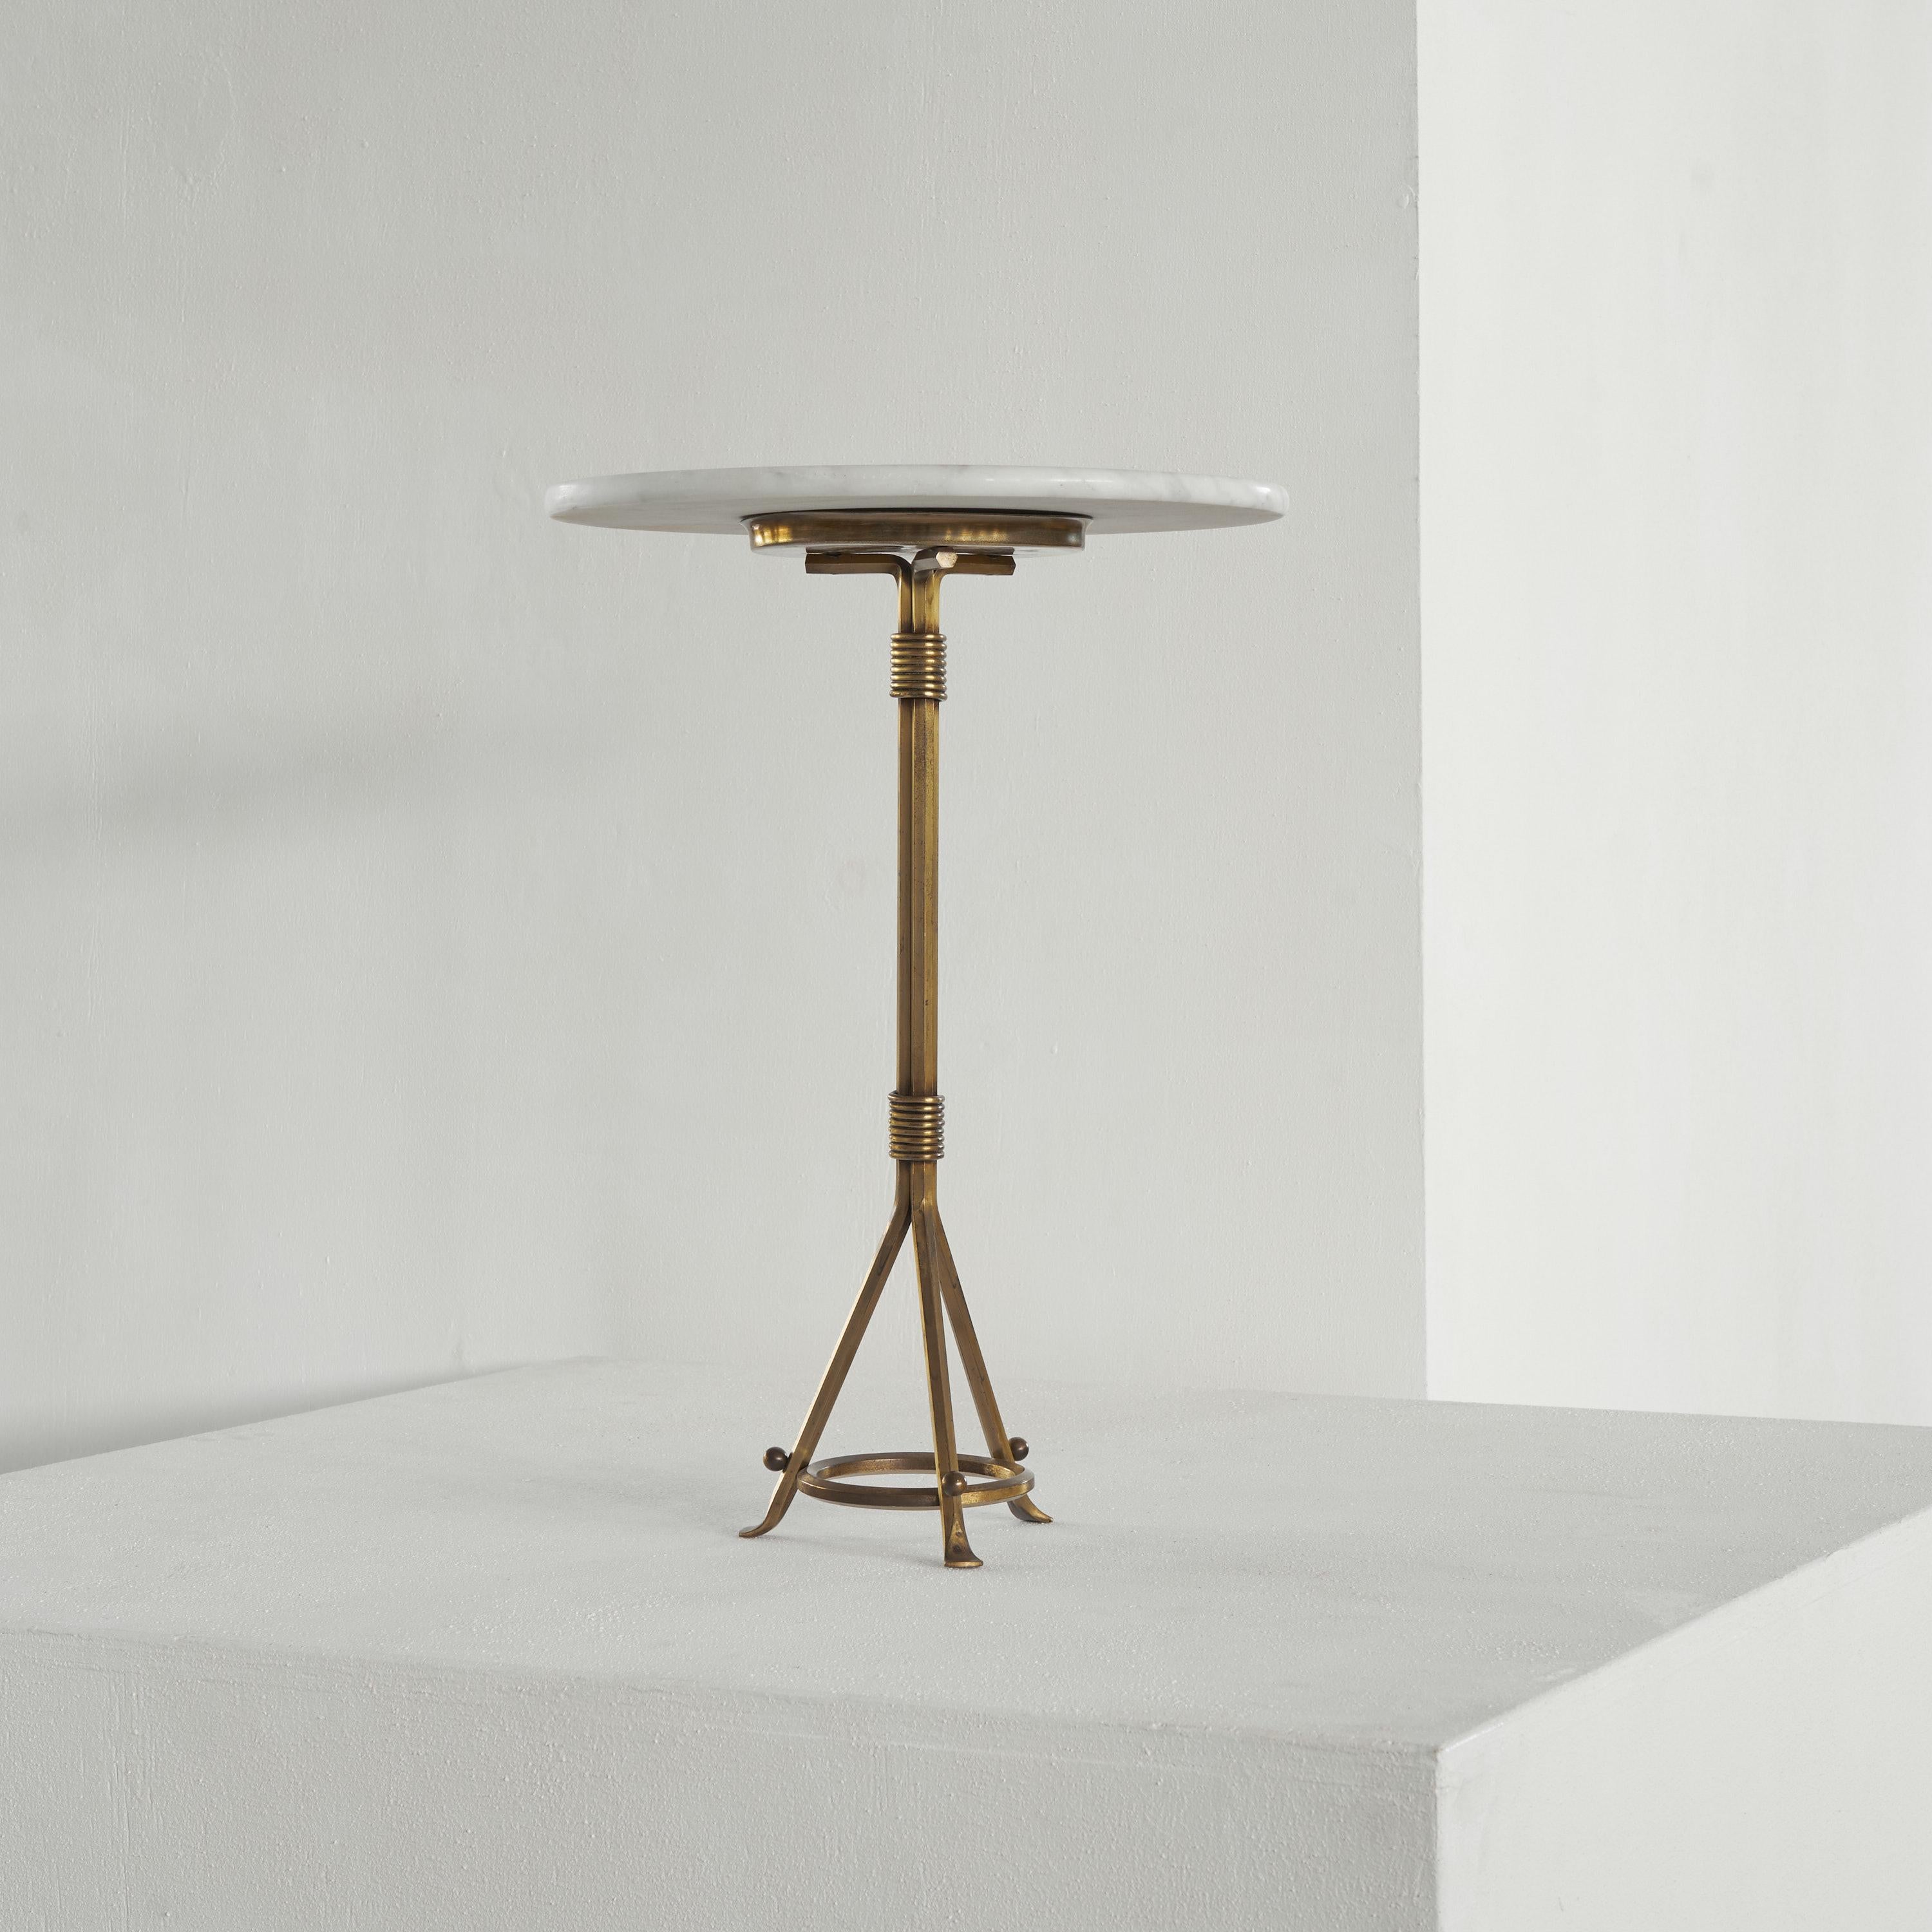 Elegant side table in Patinated brass and white marble. Early 20th century. 

Wonderful and very elegant side table with a distinct base in patinated brass and a top made out of white marble. This occasional table or side table is a very versatile